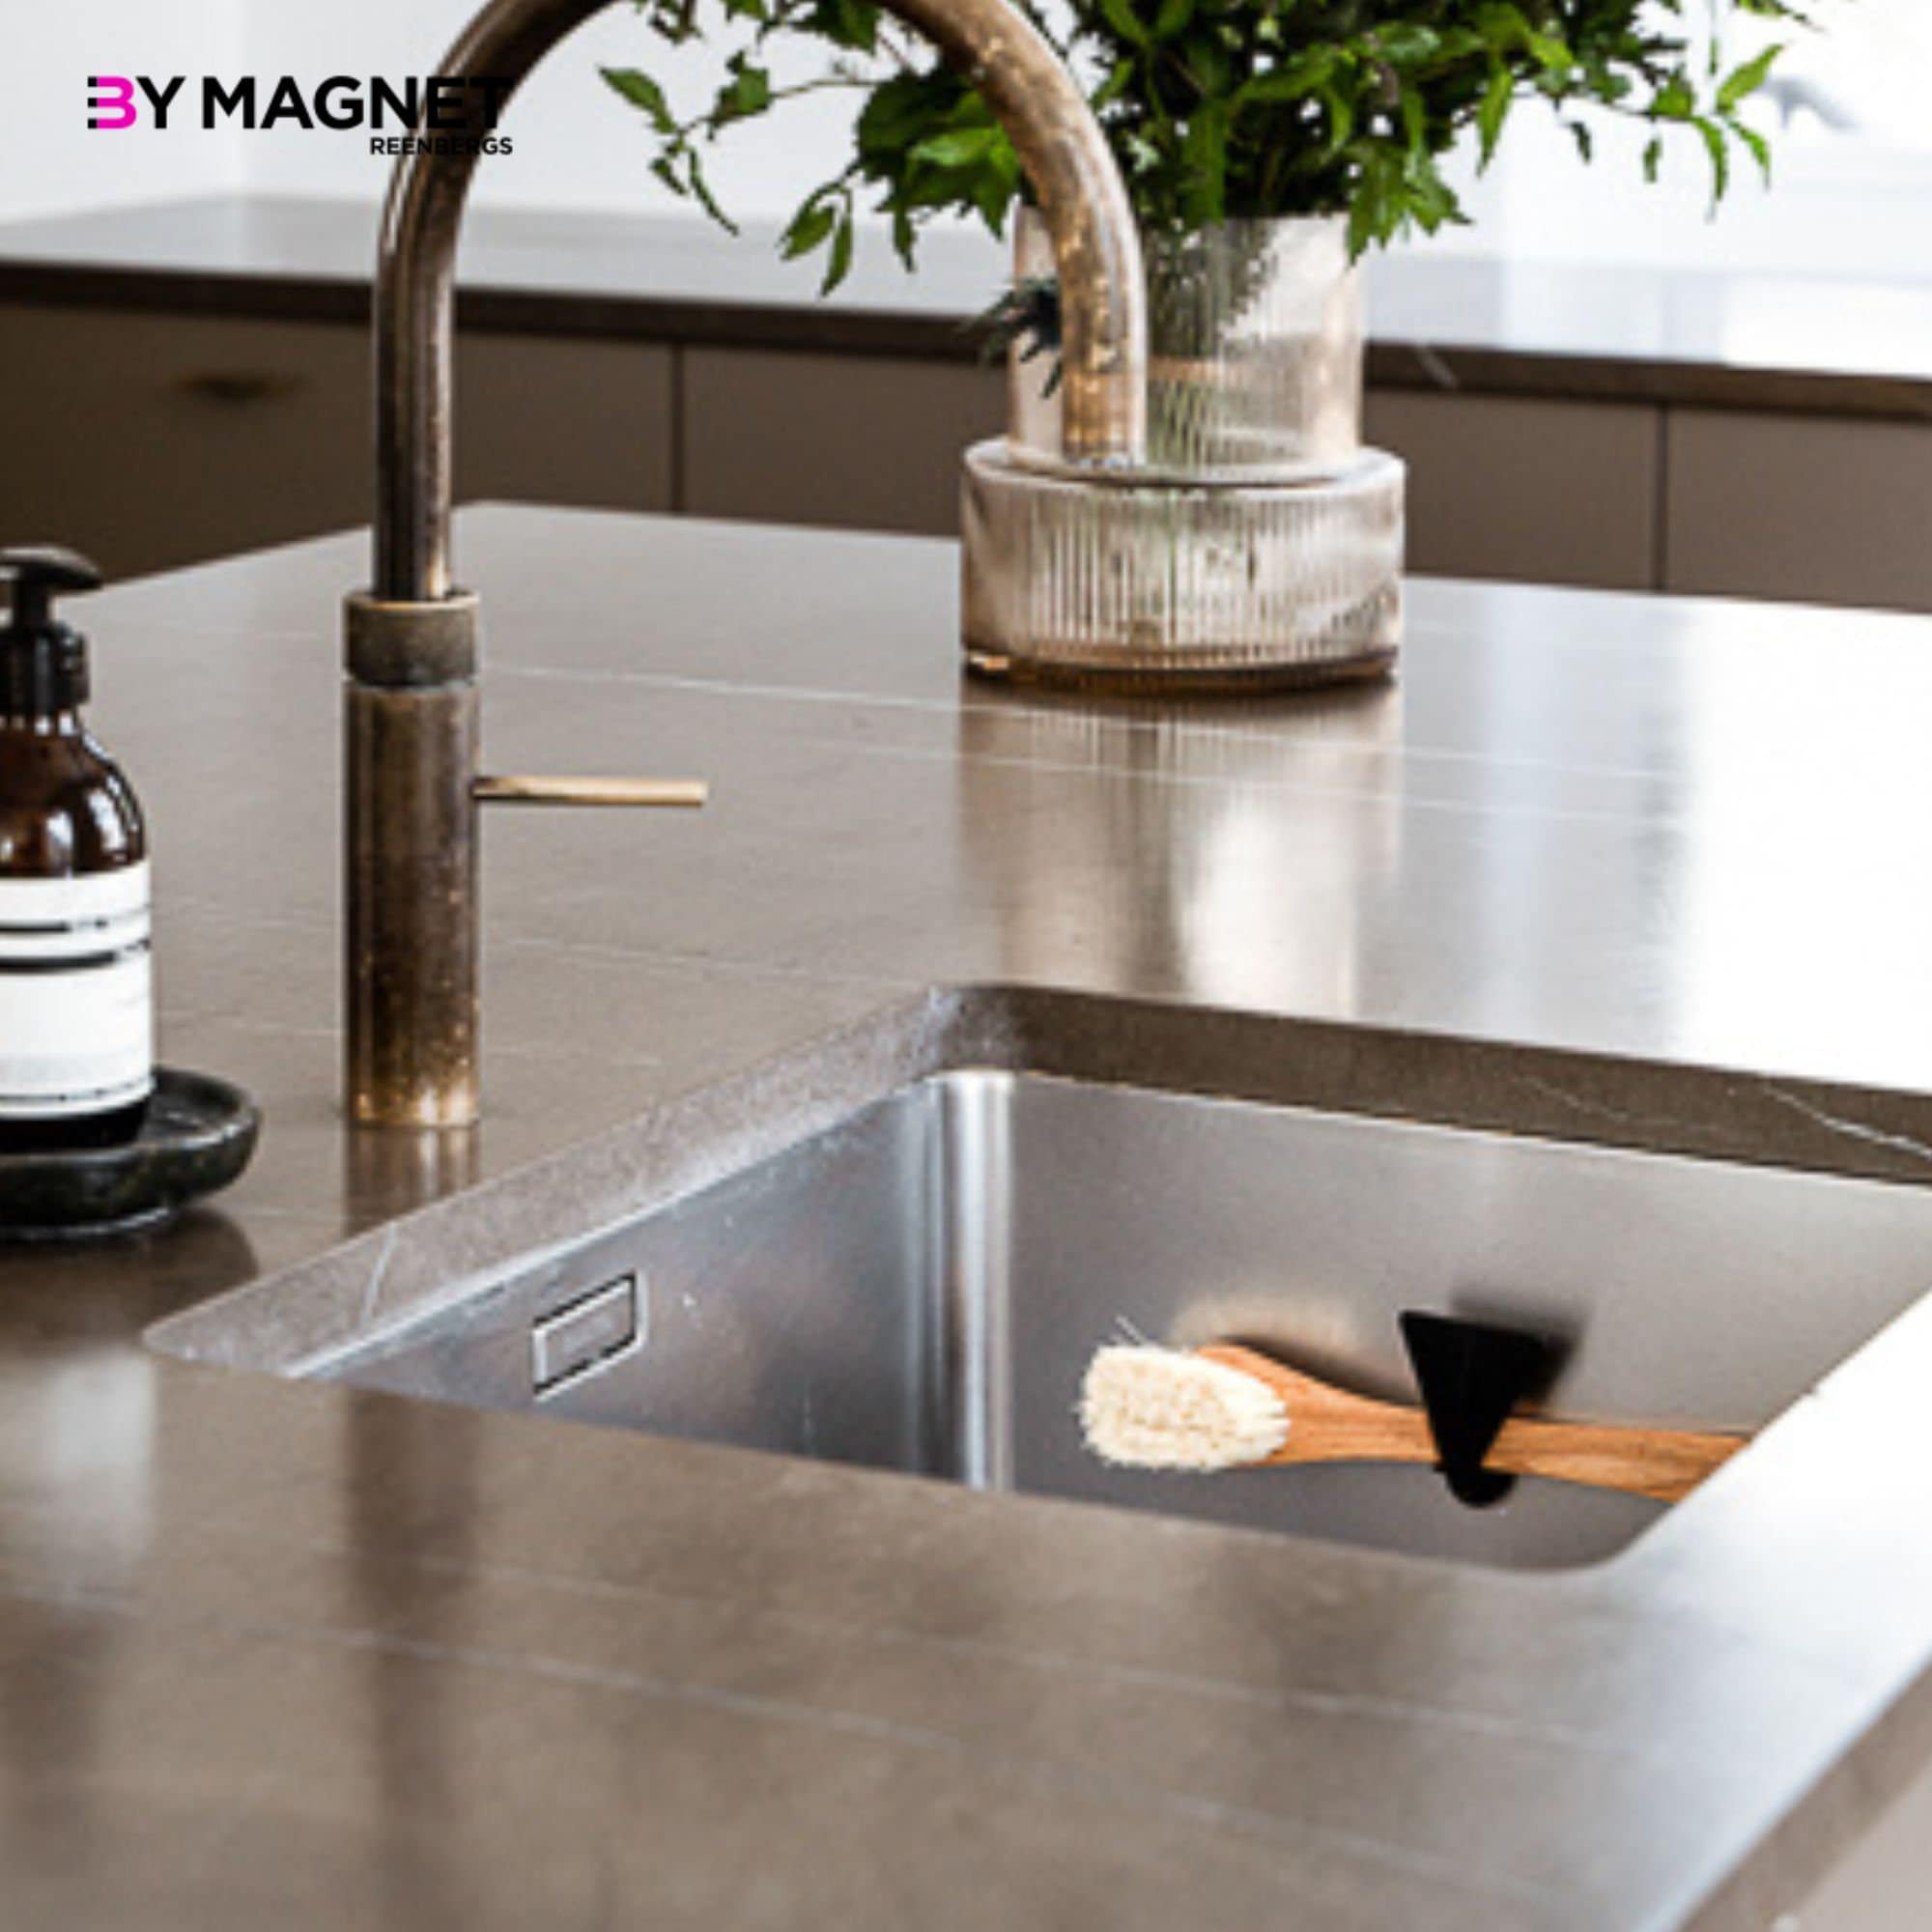 Magnetic Soap Dispensing Dish Brush & In-Sink Holder – Tovolo